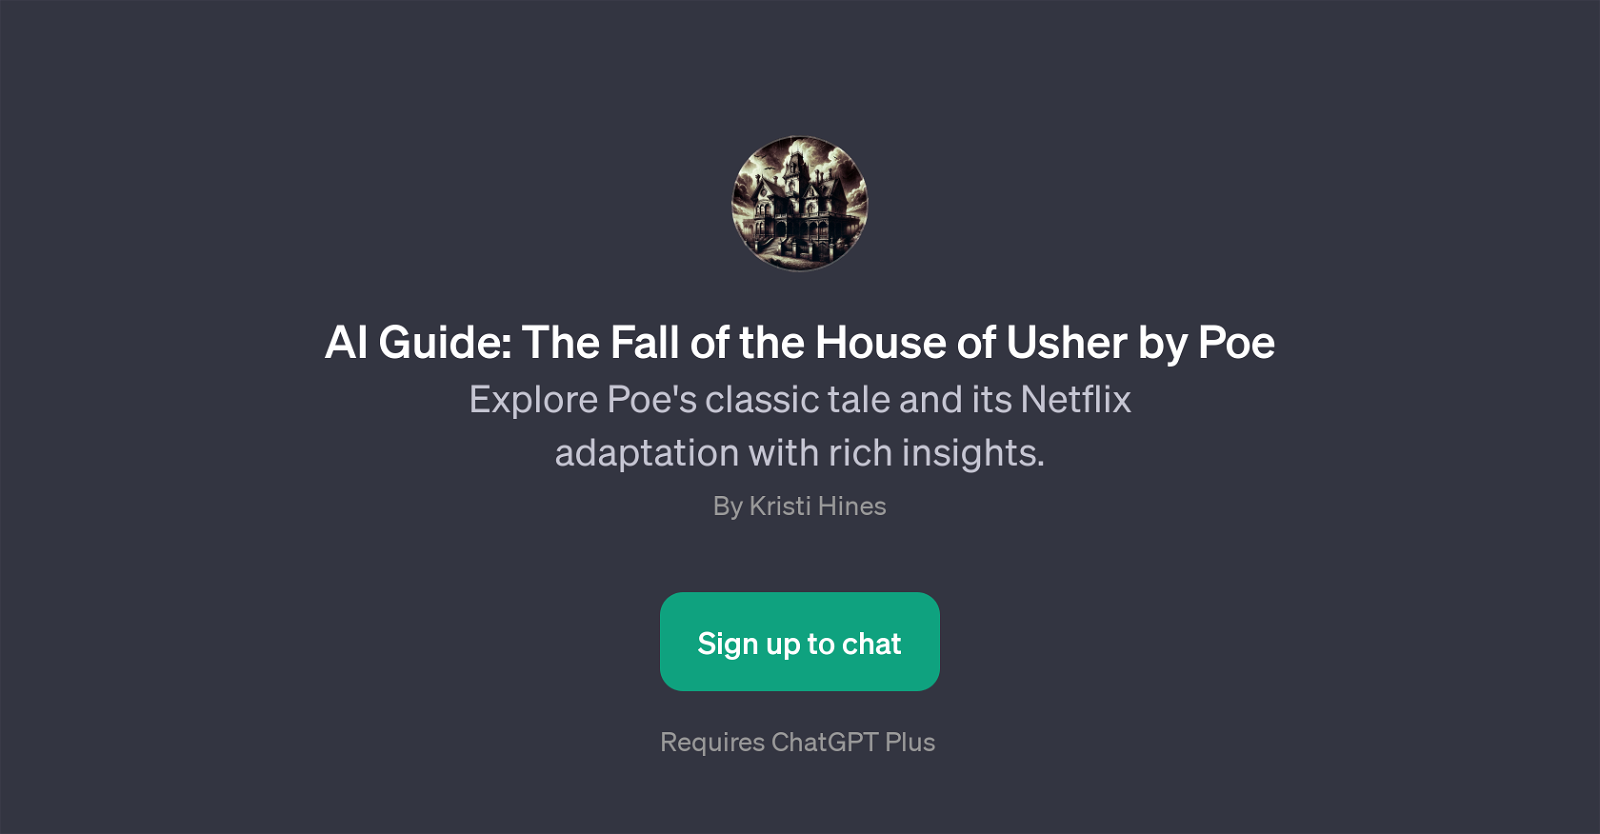 AI Guide: The Fall of the House of Usher by Poe website